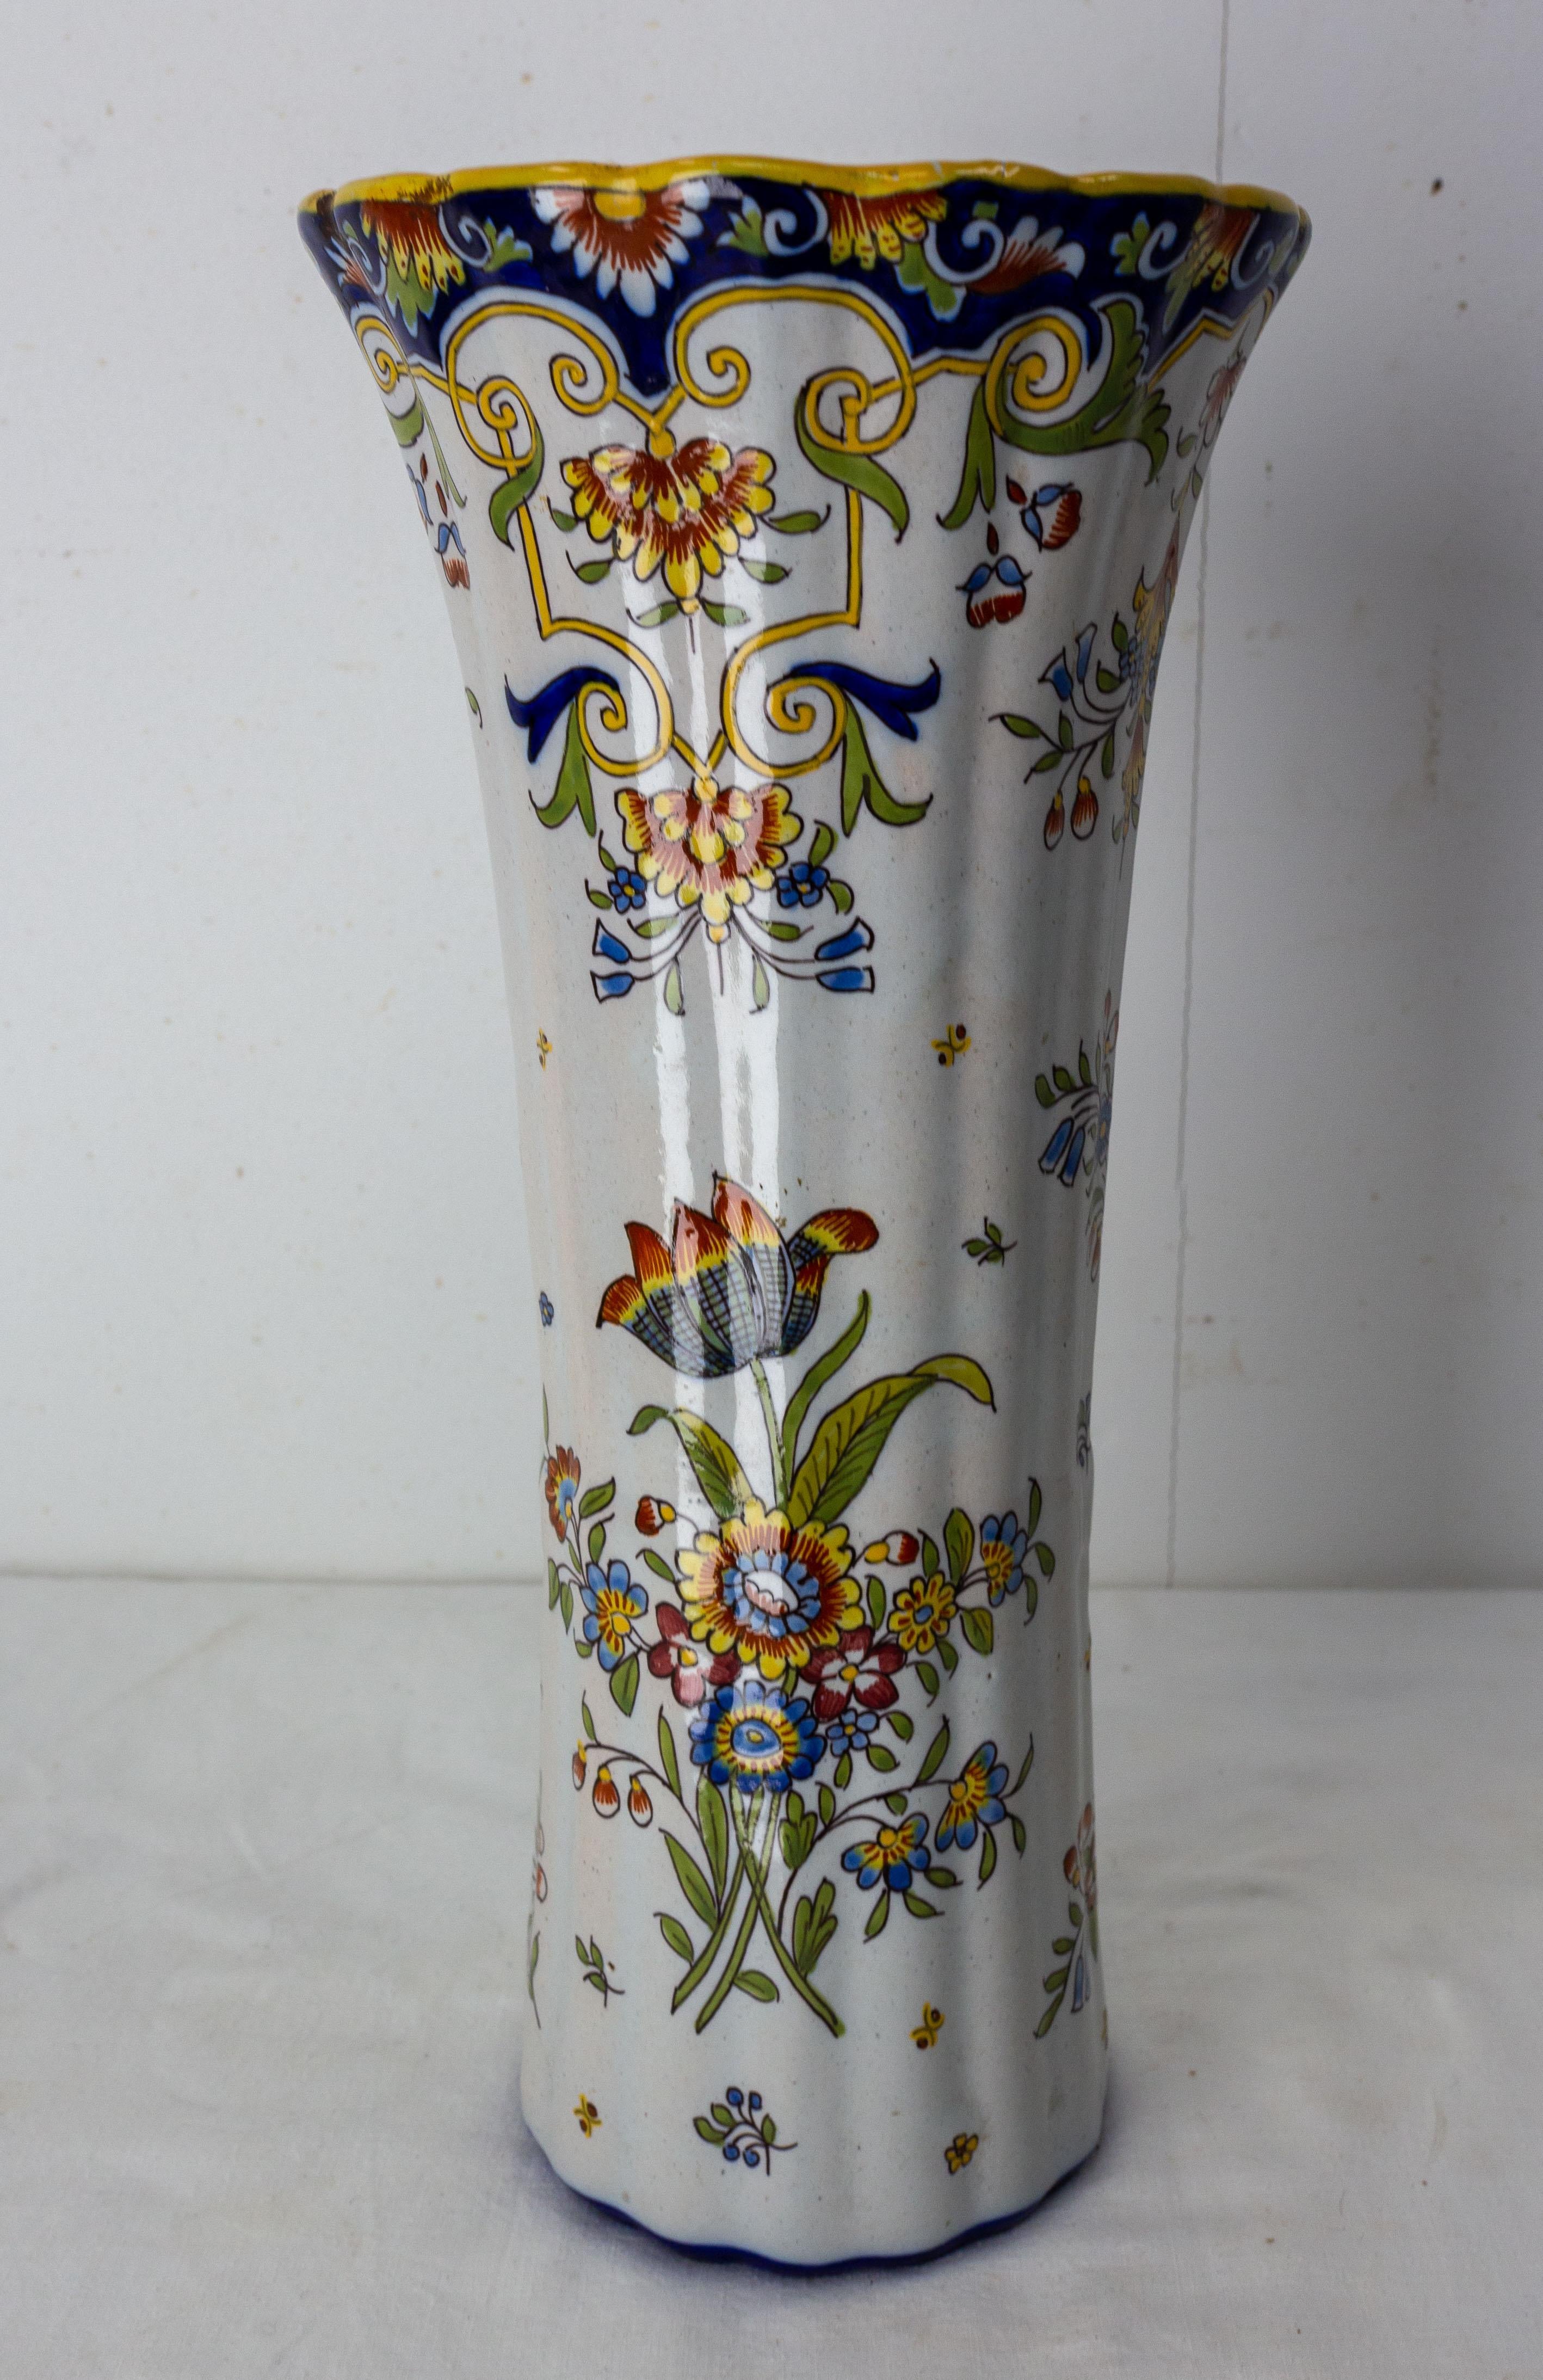 French faience vase from Rouen manufactures.
Features hand painted floral decor in a blue, orange, white and yellow and green palette
Good antique condition, apparent cracks on the icing that do not affect the quality of the vase.

Shipping:
D 15,5